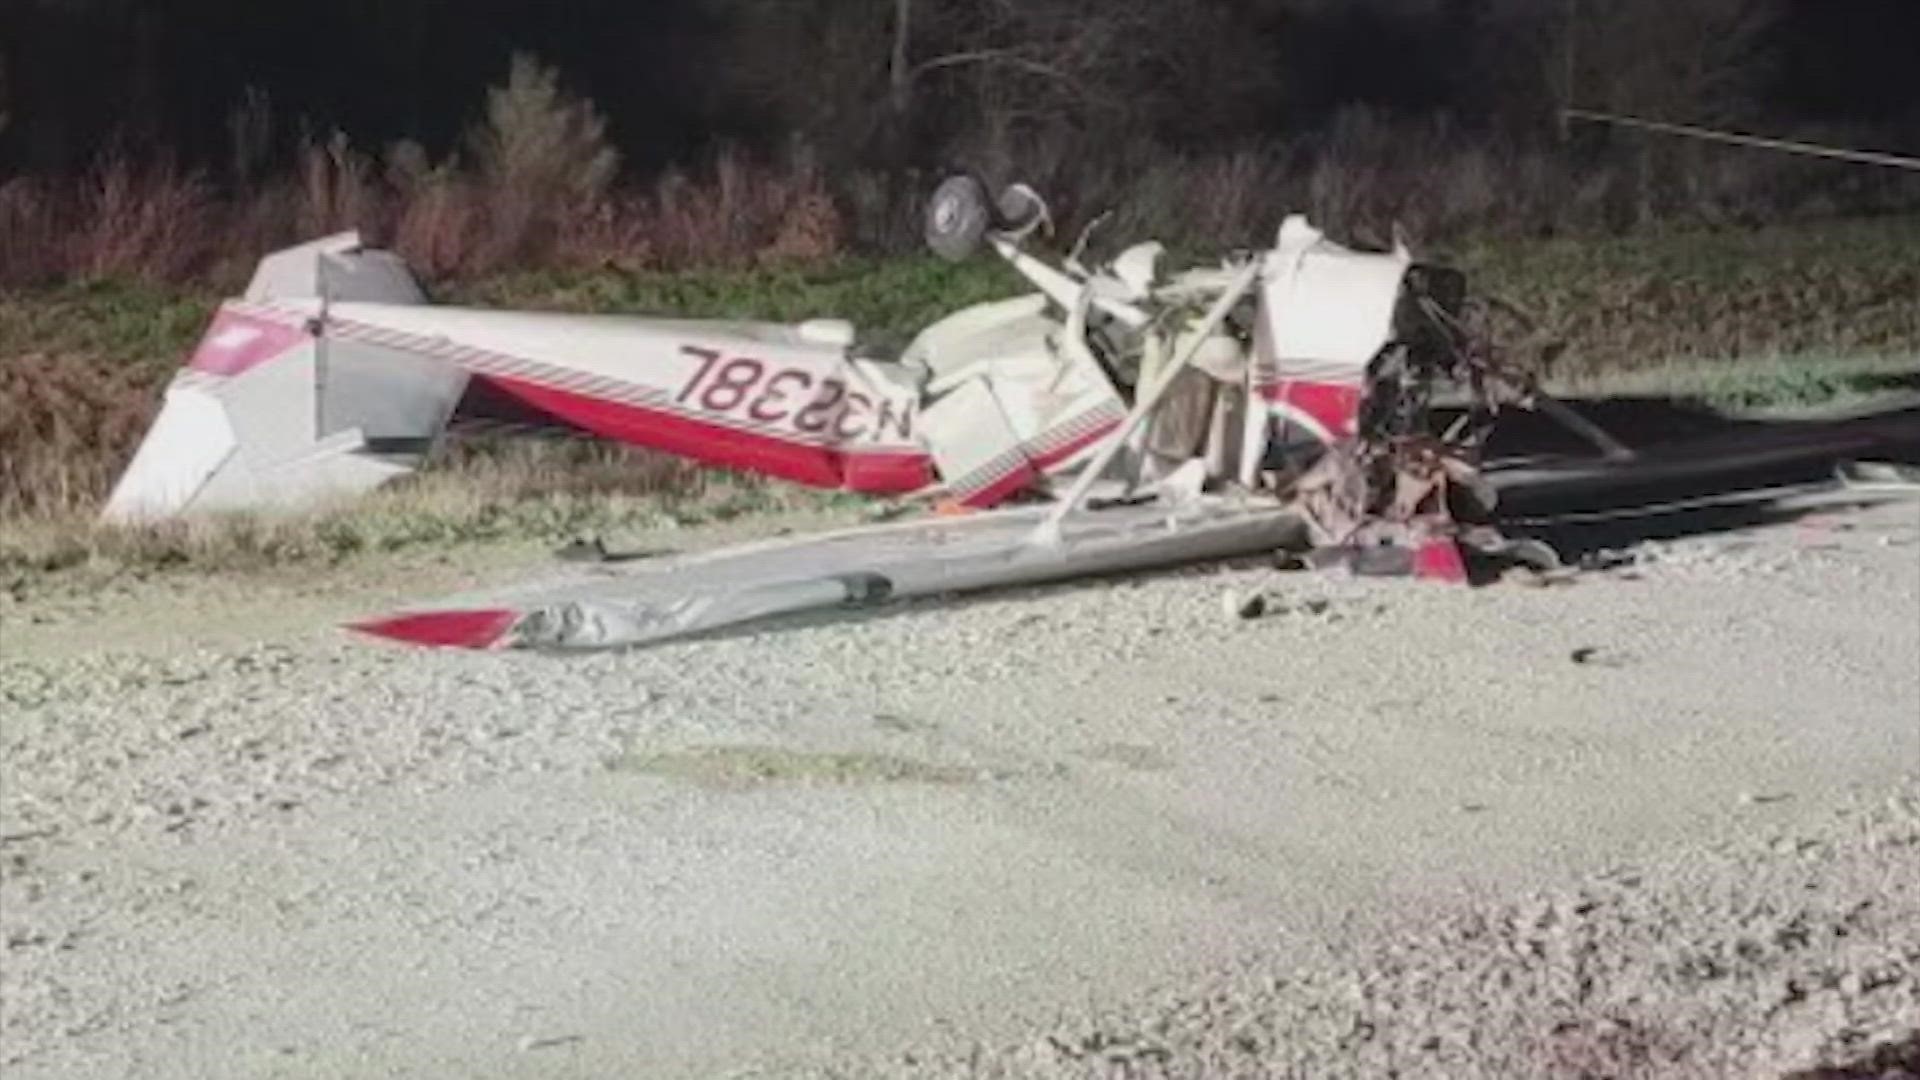 Sheriff Ed Gonzalez said a plane crashed Sunday near a railyard near the intersection of Beaumont Highway and Adlong Johnson Road.